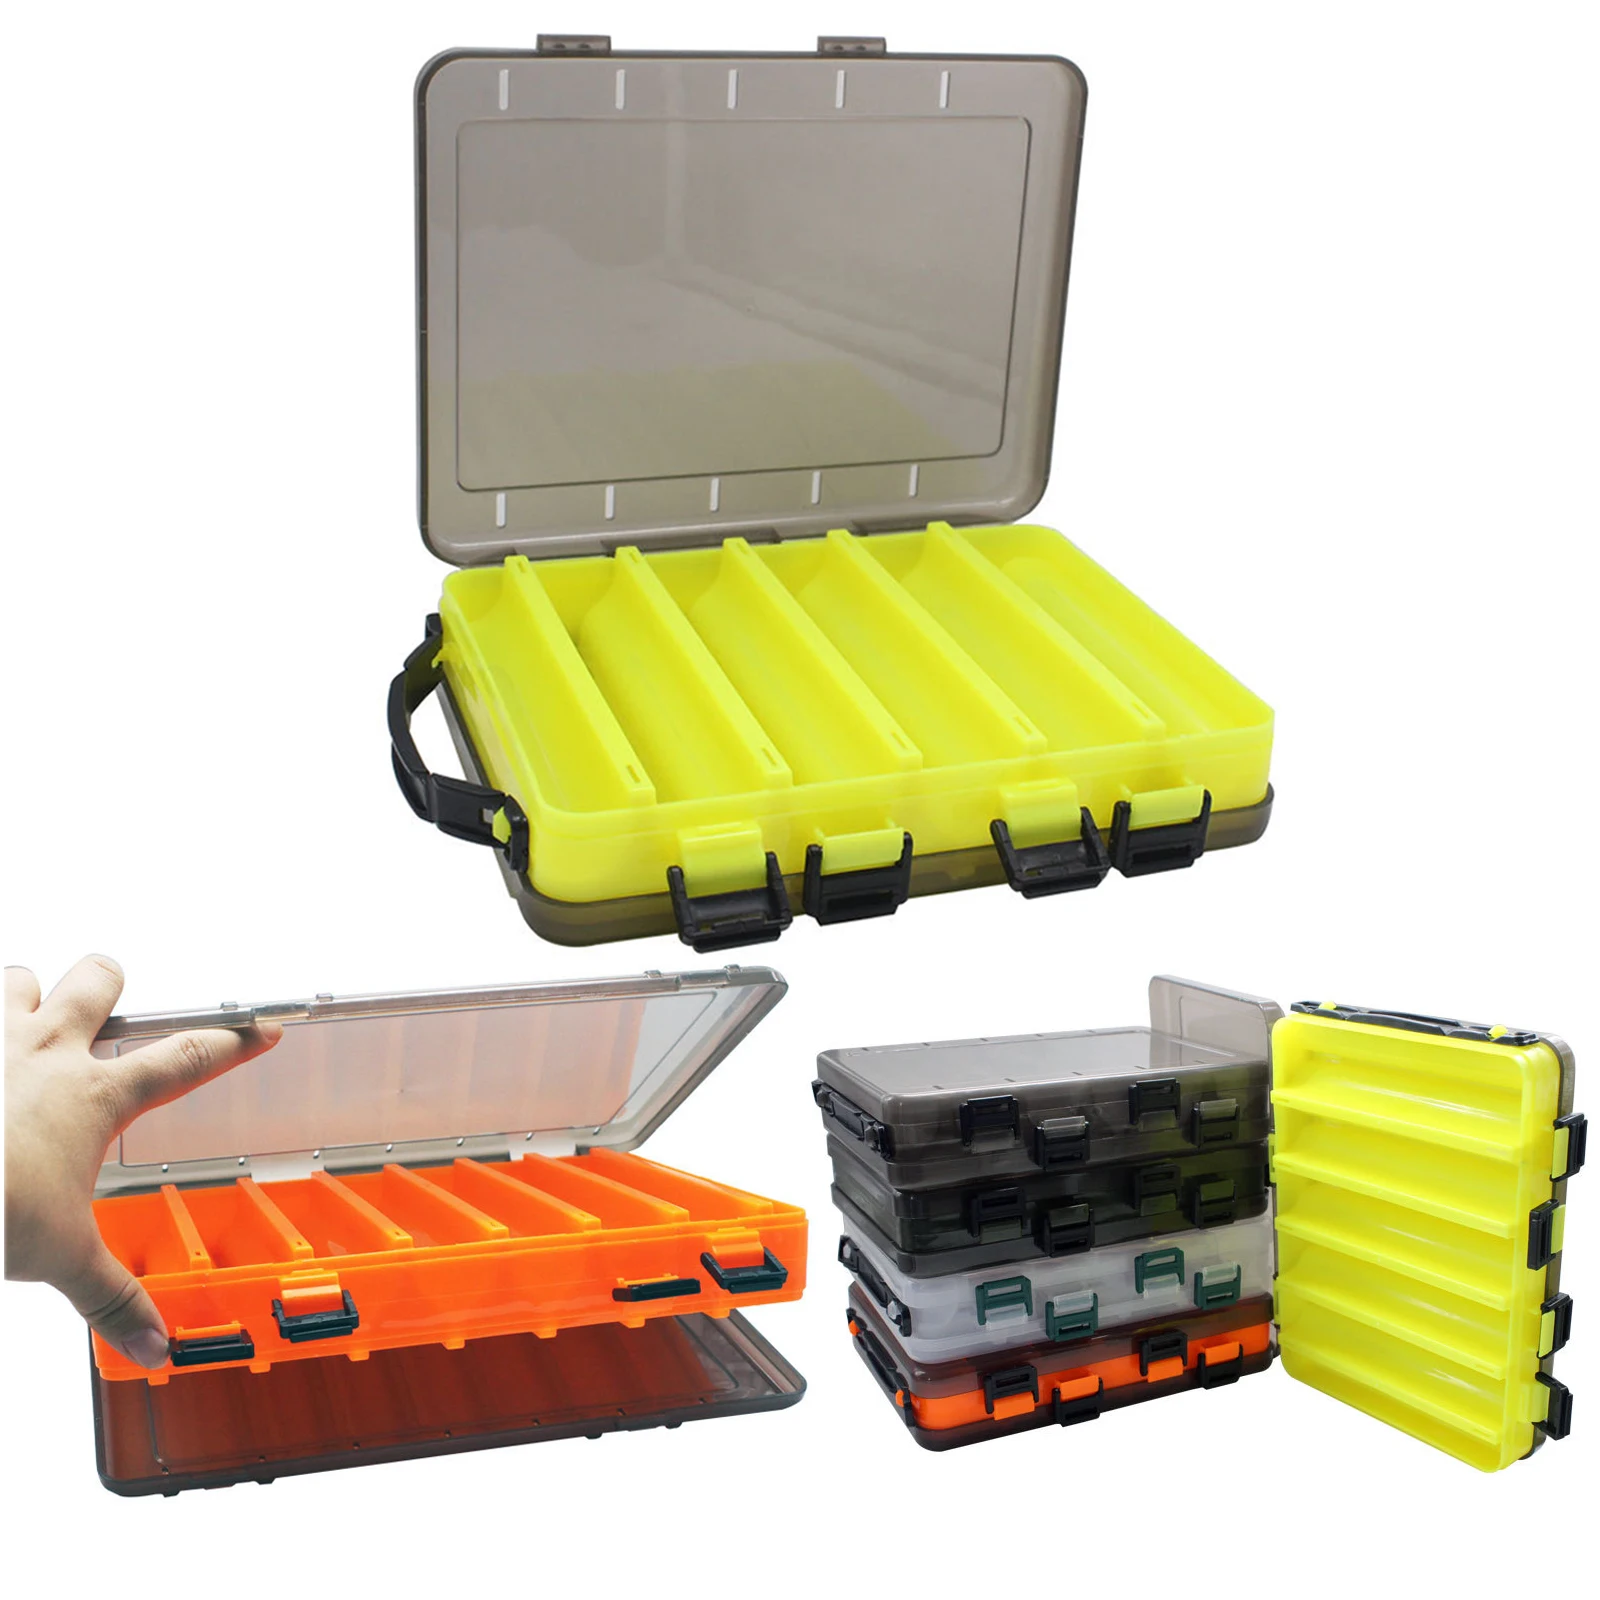 https://ae01.alicdn.com/kf/S74e8b5e89ac14d67bc9e5dc835e8fbf4G/Large-Fishing-Tackle-Boxes-Double-Layer-Portable-Lure-Storage-Multi-Compartments-Gear-Tool-Box-Carry-Plastic.jpg